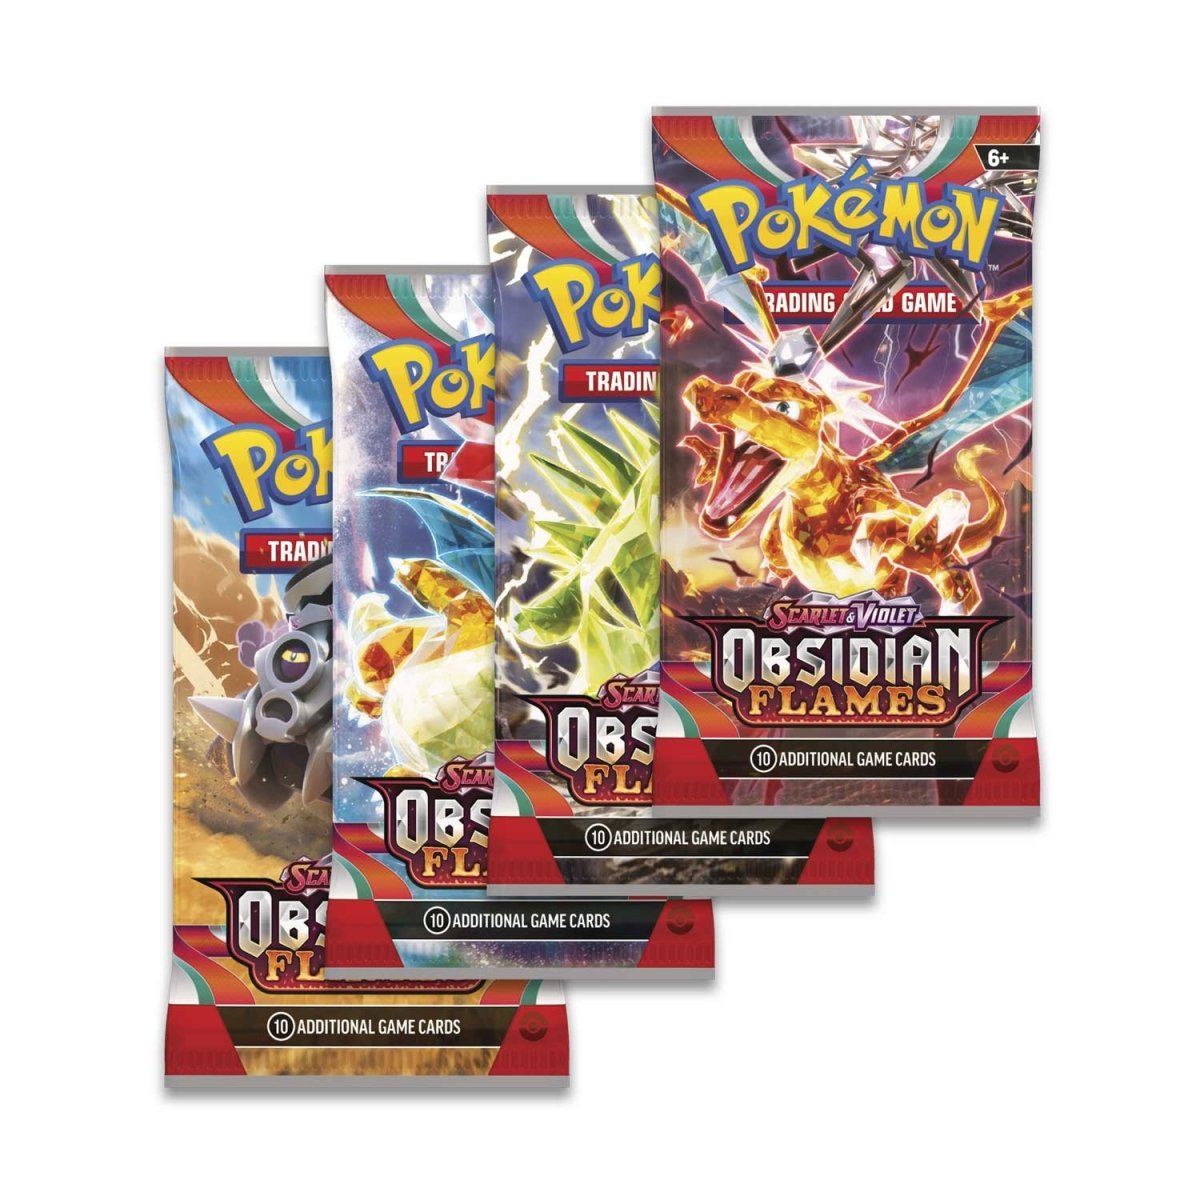 Pokémon Trading Card Game: Obsidian Flames Booster Pack